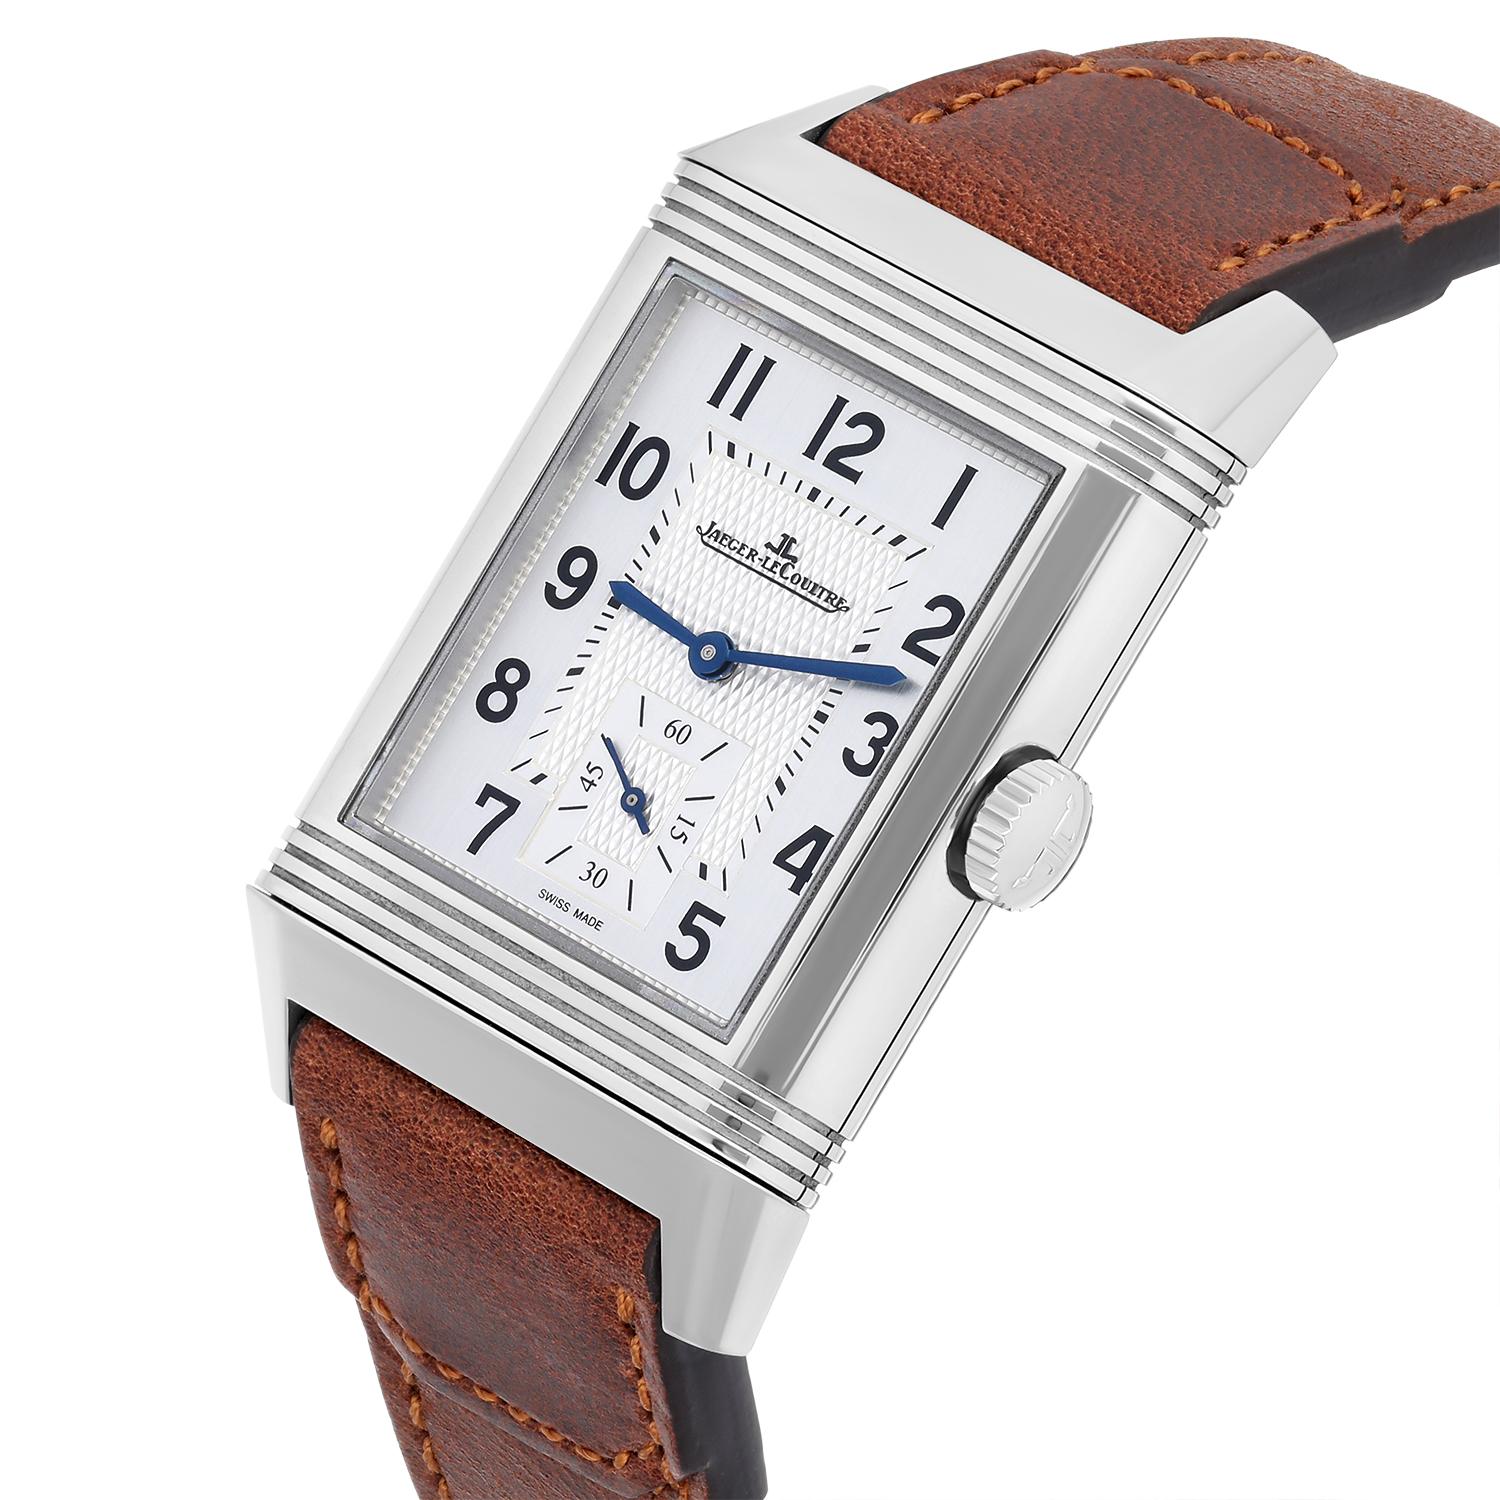 Jaeger-LeCoultre Reverso Duoface Classic Duoface Small Seconds Watch (Q3848422) For Sale 1